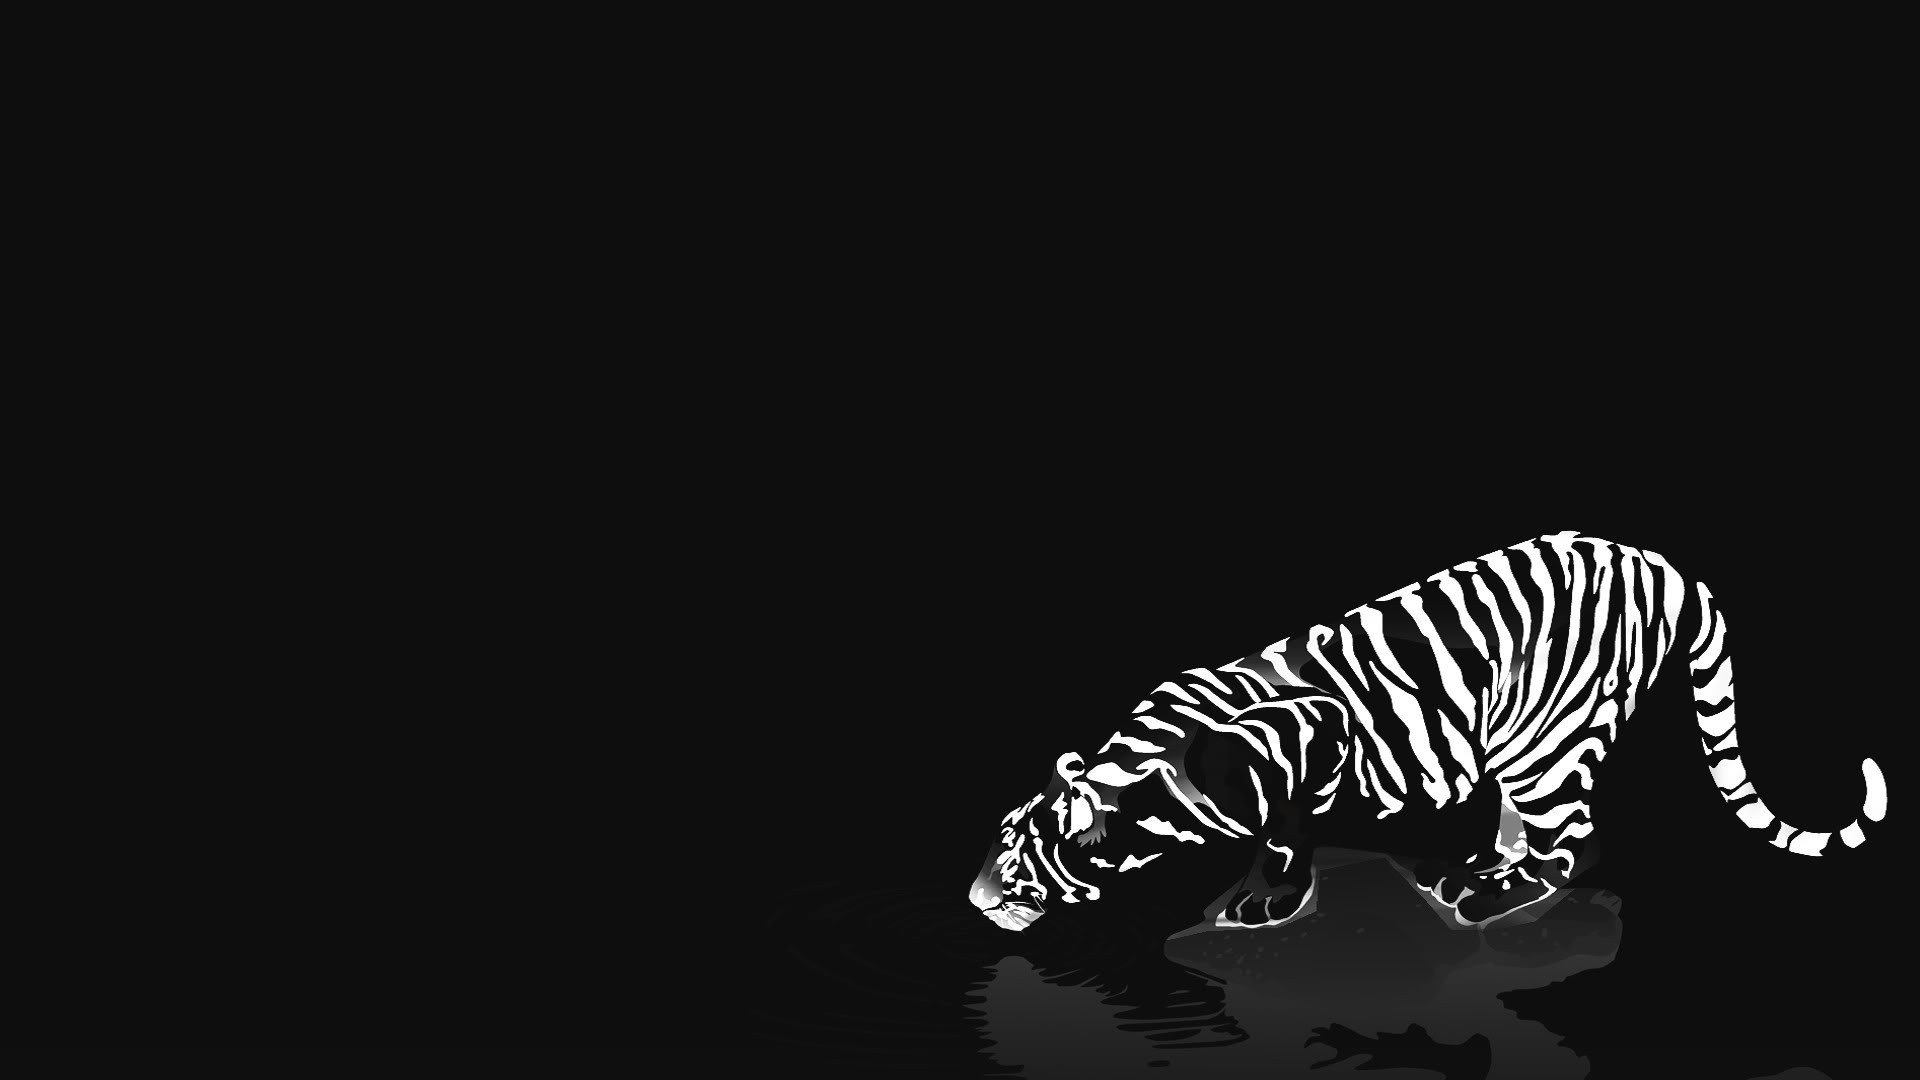 cats, Animals, Tigers, White, Tiger, Reflections, Black, Background Wallpaper